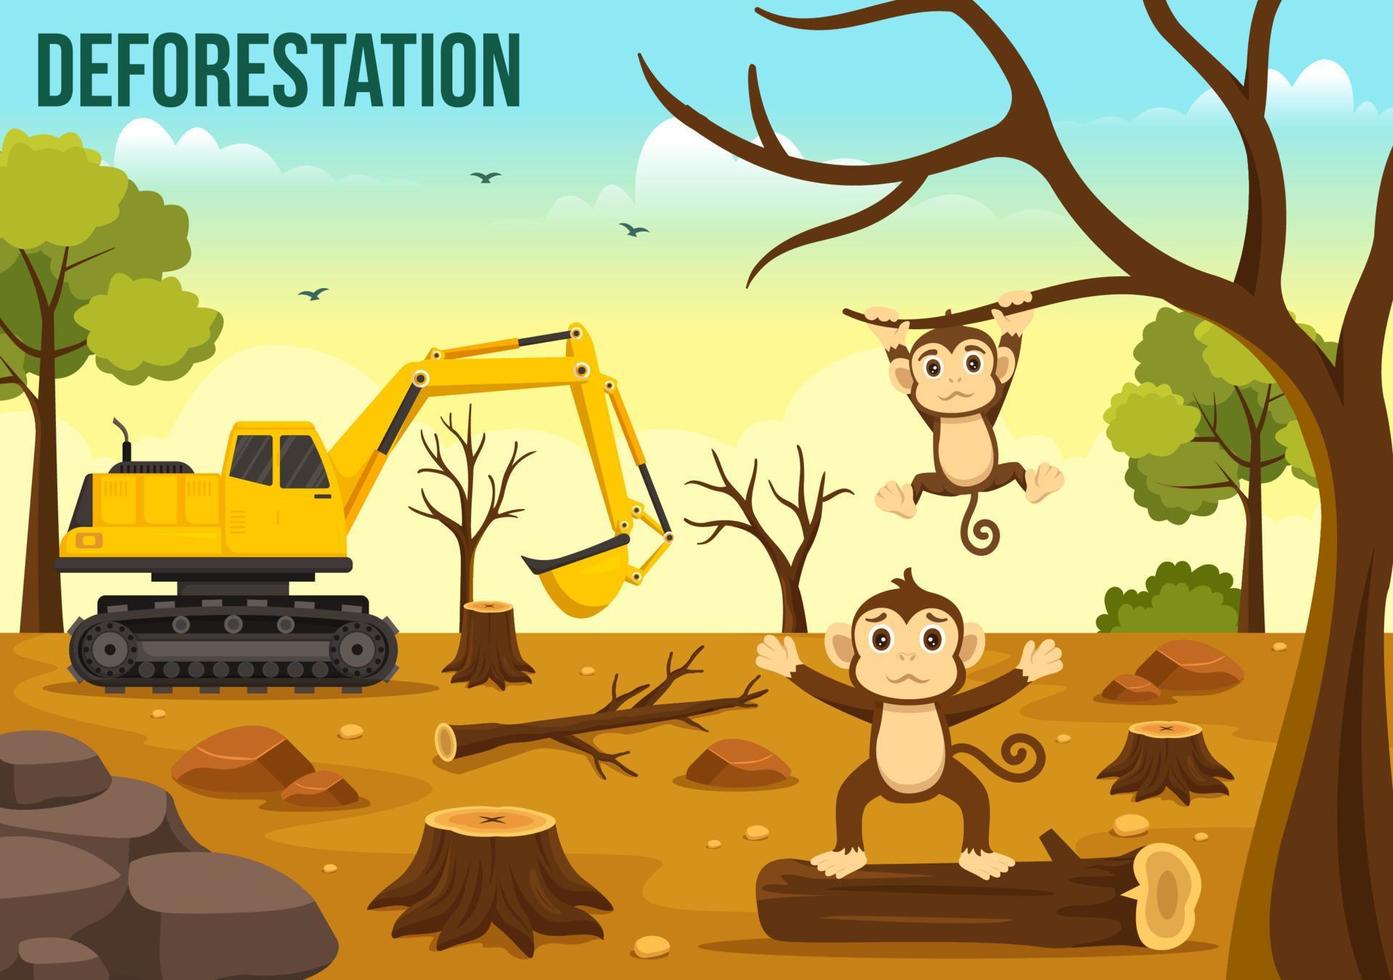 Deforestation Illustration with Tree in the Felled Forest and Burning Into Pollution Causing the Extinction of Animals in Cartoon Hand Drawn Templates vector